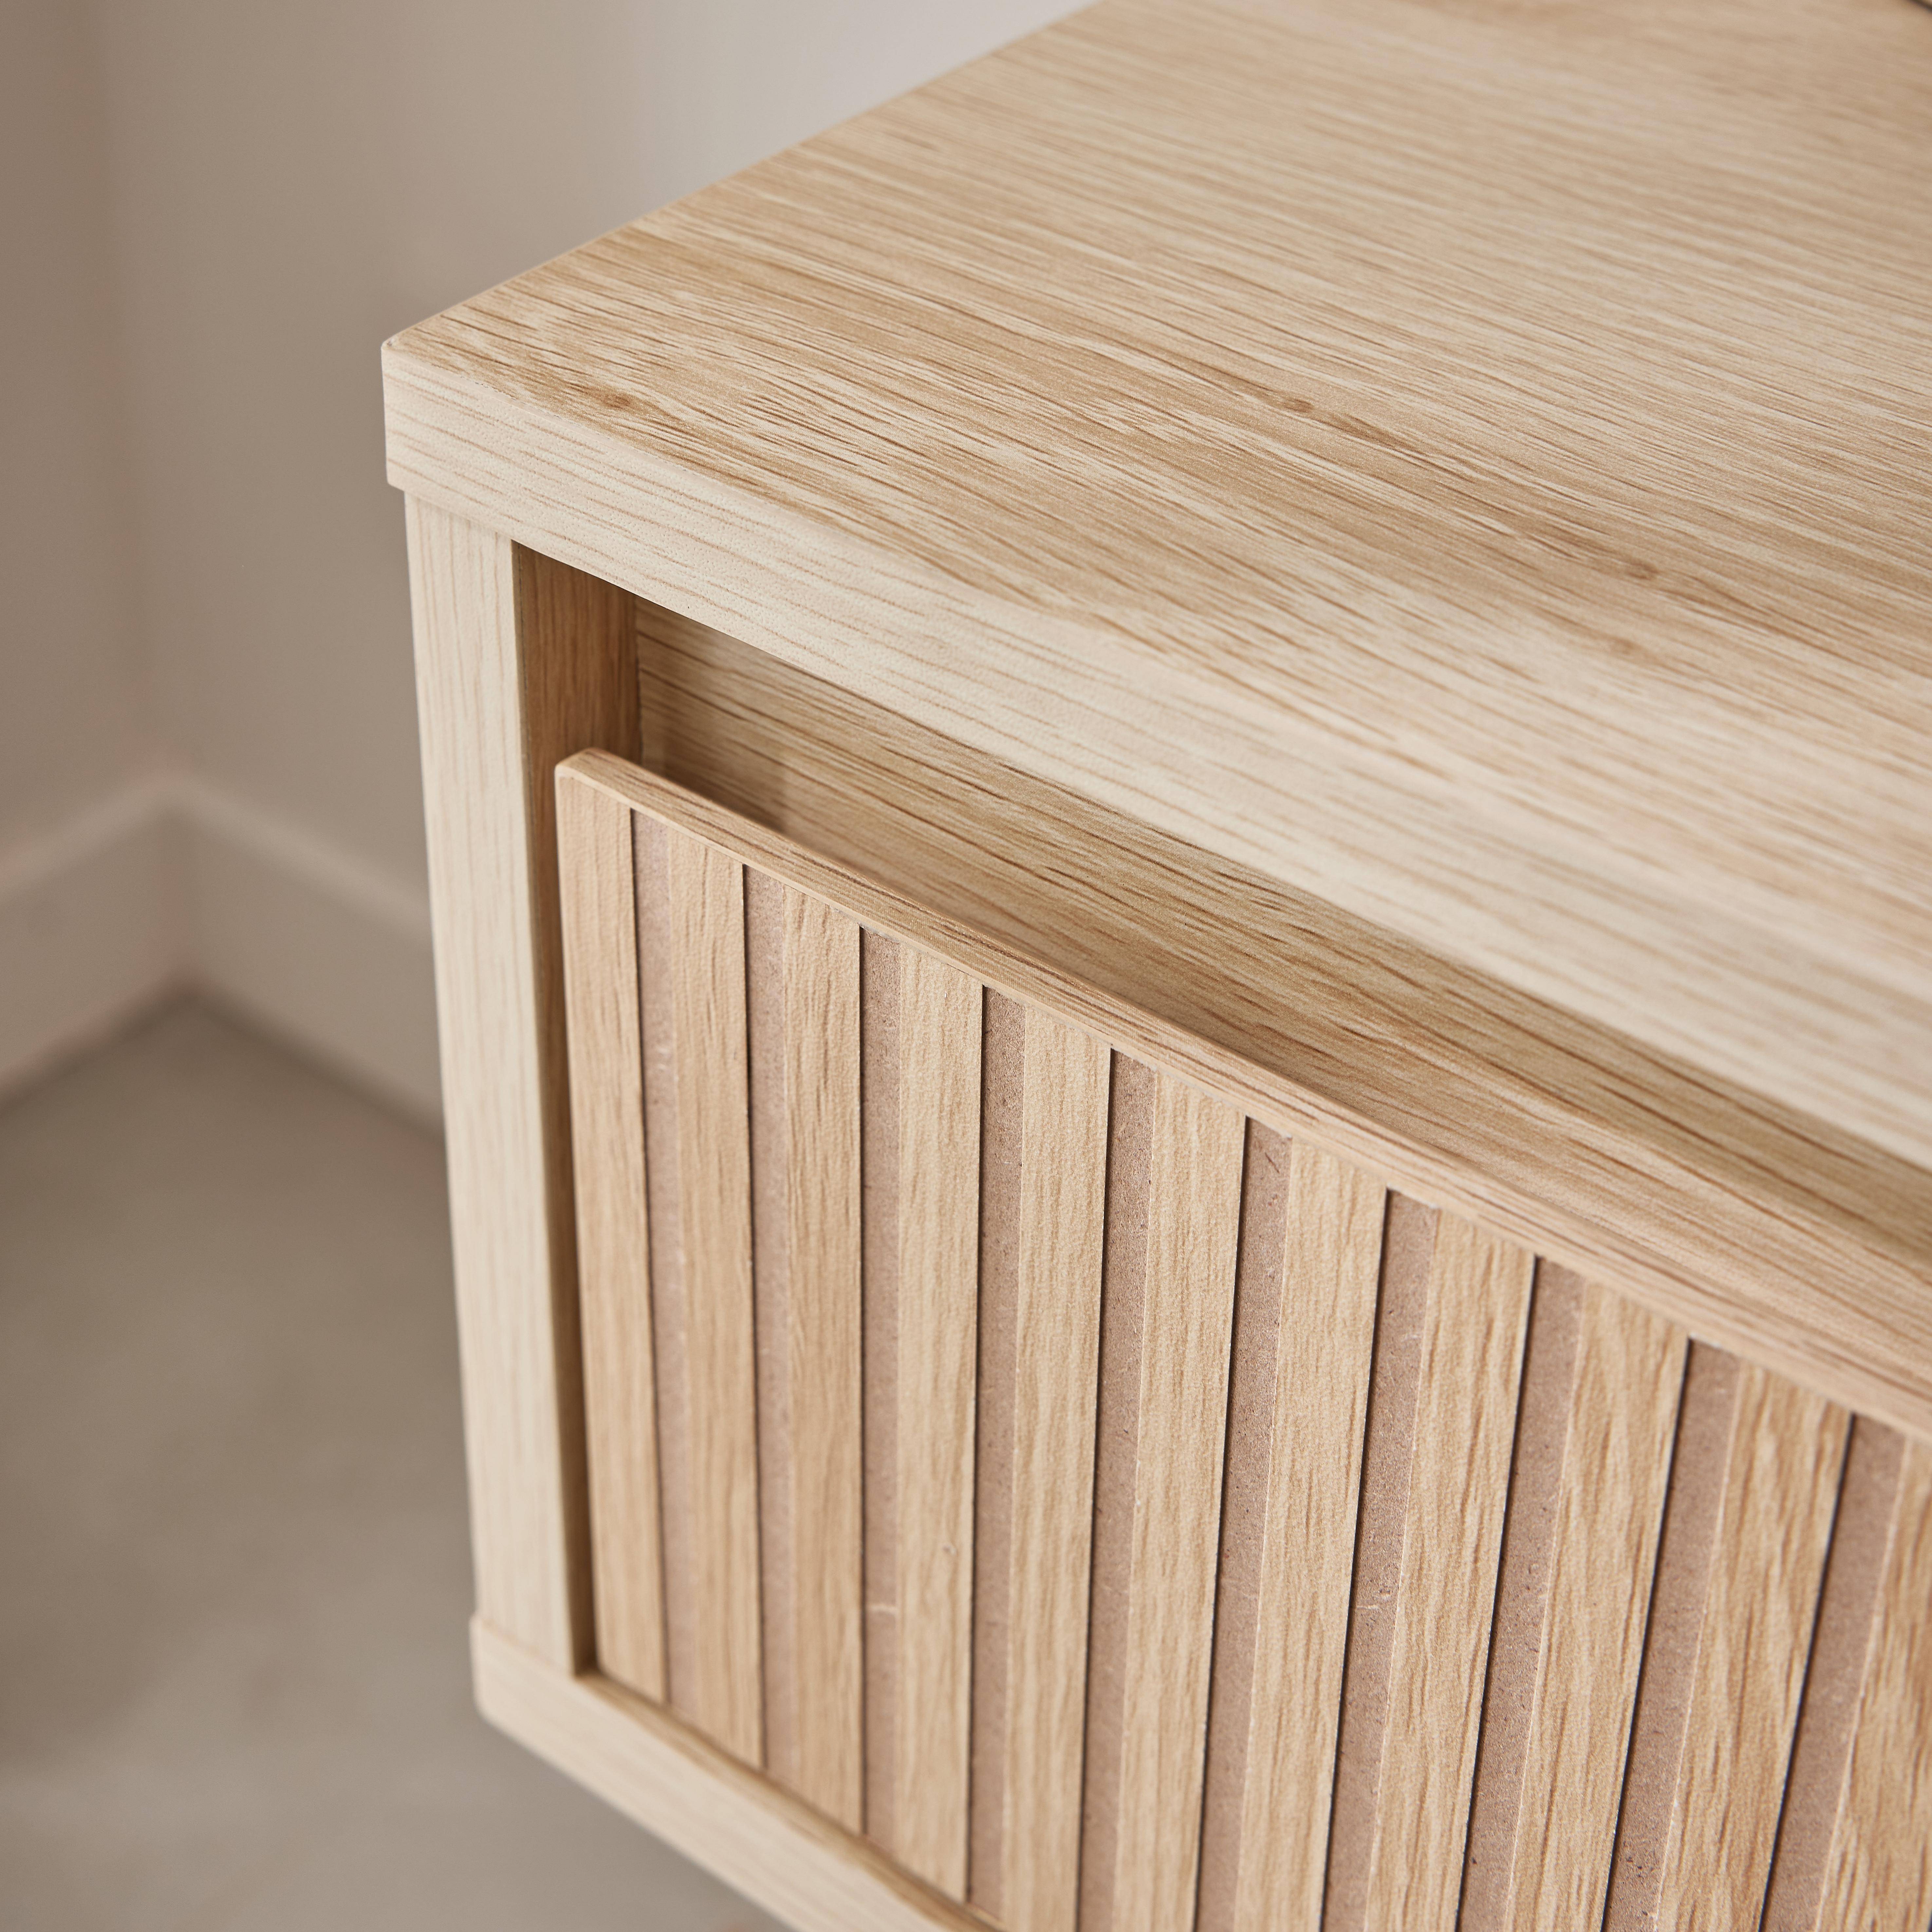 Bedside table with one drawer. Natural colour laminate panels. Fir wood legs.  W 39 x 39 x H 55.4cm LINEAR,sweeek,Photo3